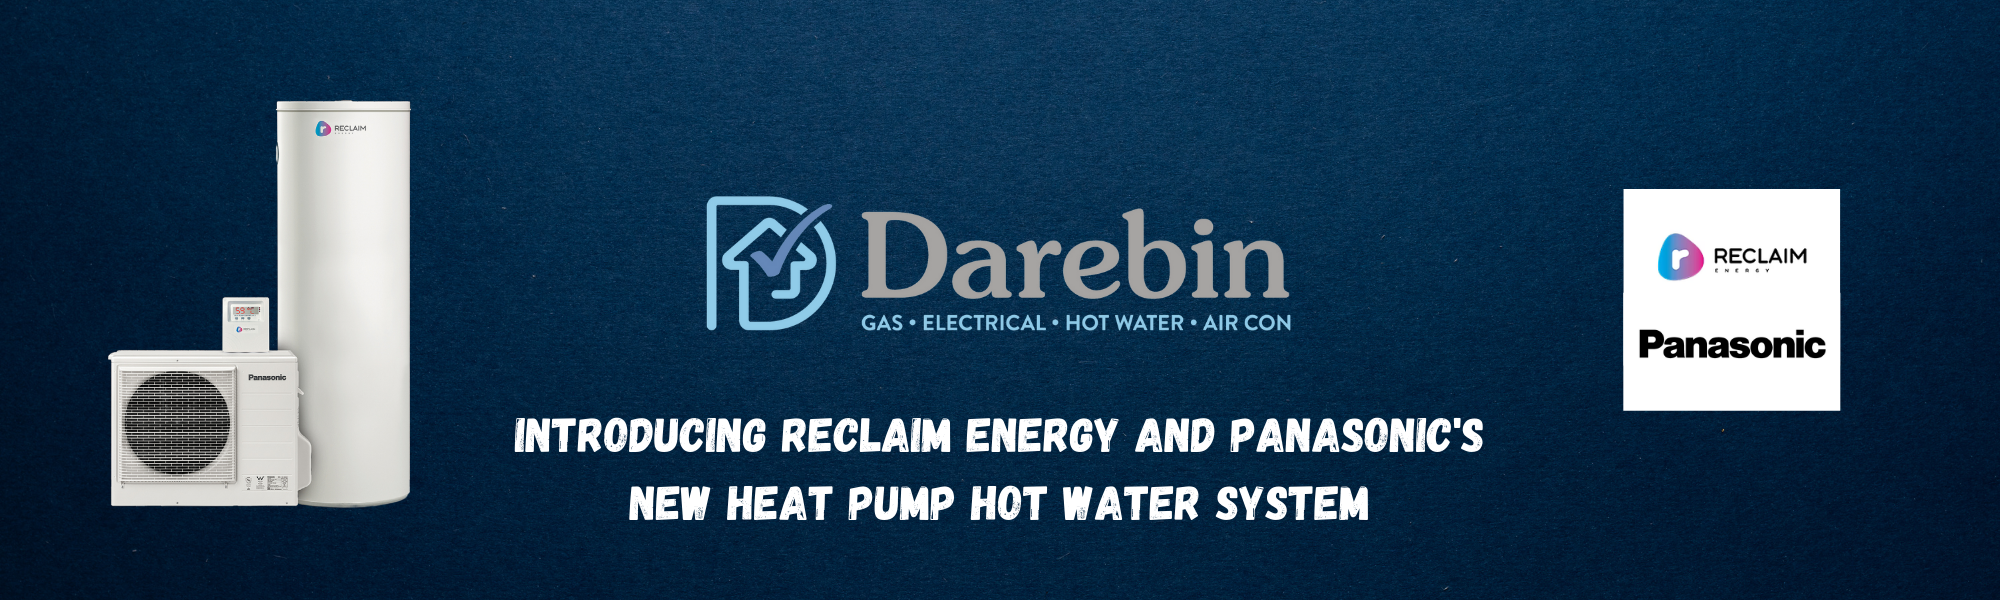 Introducing Reclaim Energy and Panasonic’s New Heat Pump Hot Water System